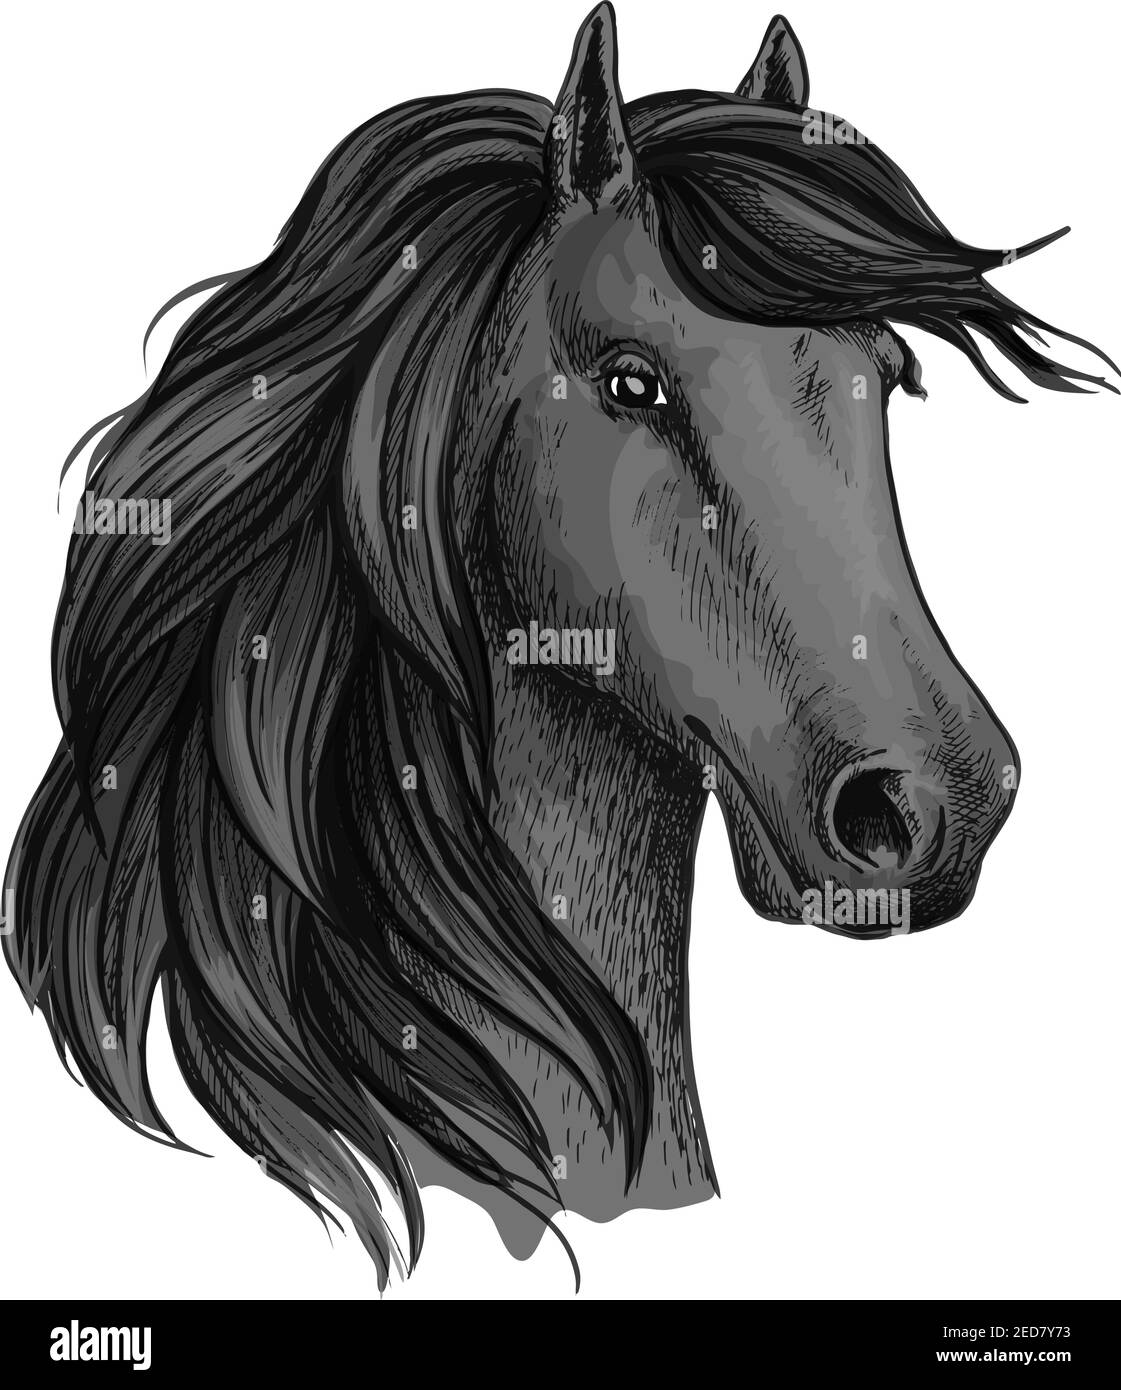 Head sketch of horse mustang or stallion. Dapple gray broodmare or mare, foal or filly with wavy mane, horsey domestic marish. May be used for equestr Stock Vector